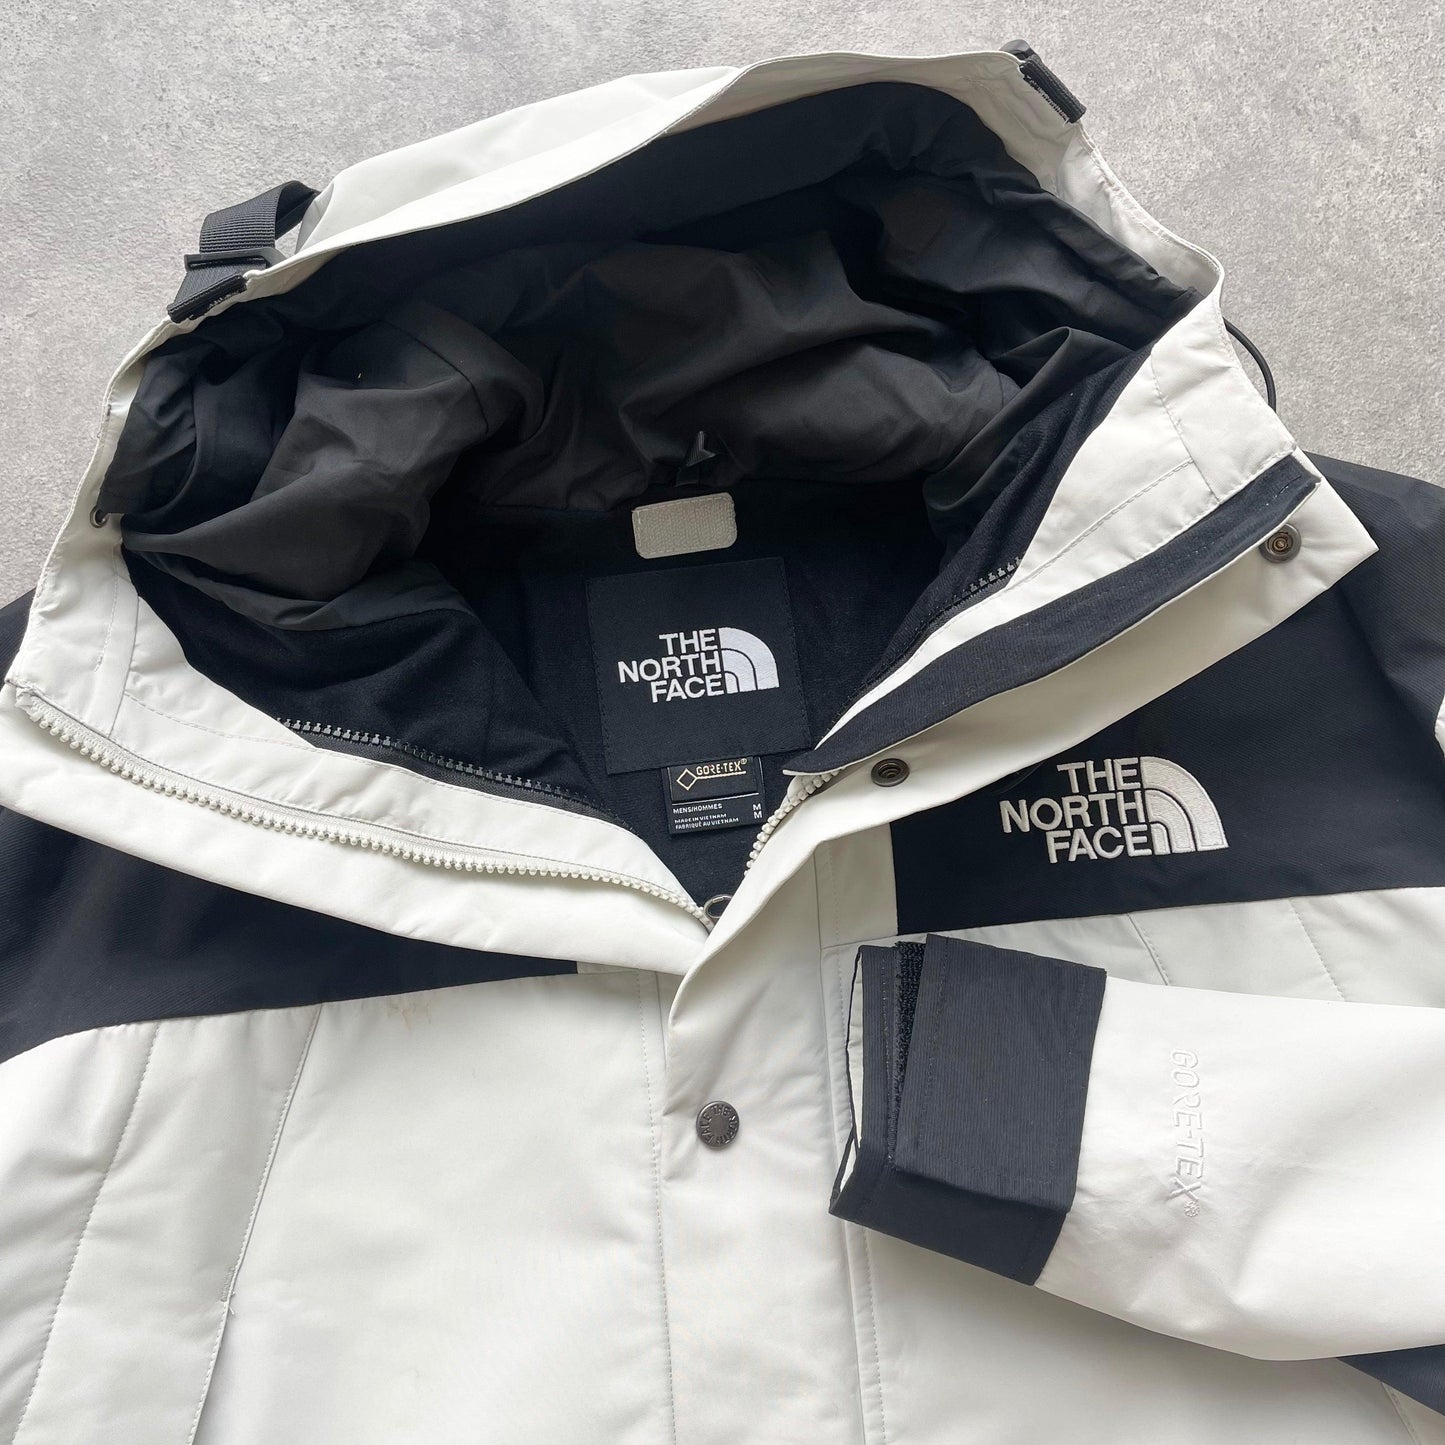 The North Face Gore-tex fleece lined mountain jacket (M) - Known Source